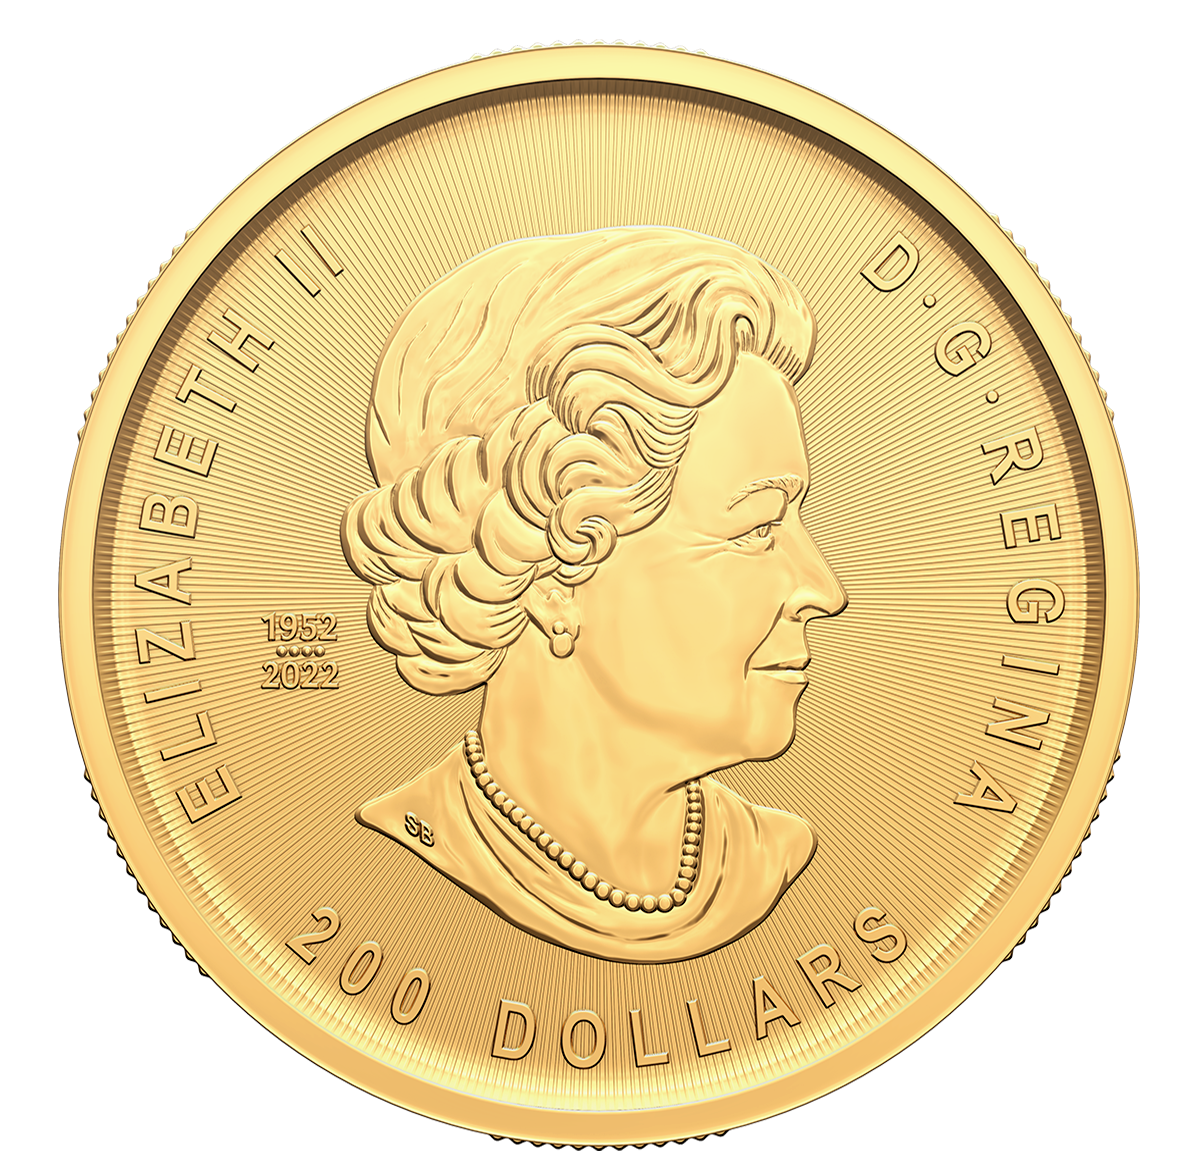 Special edition loonie commemorates the gold rush and Yukon First